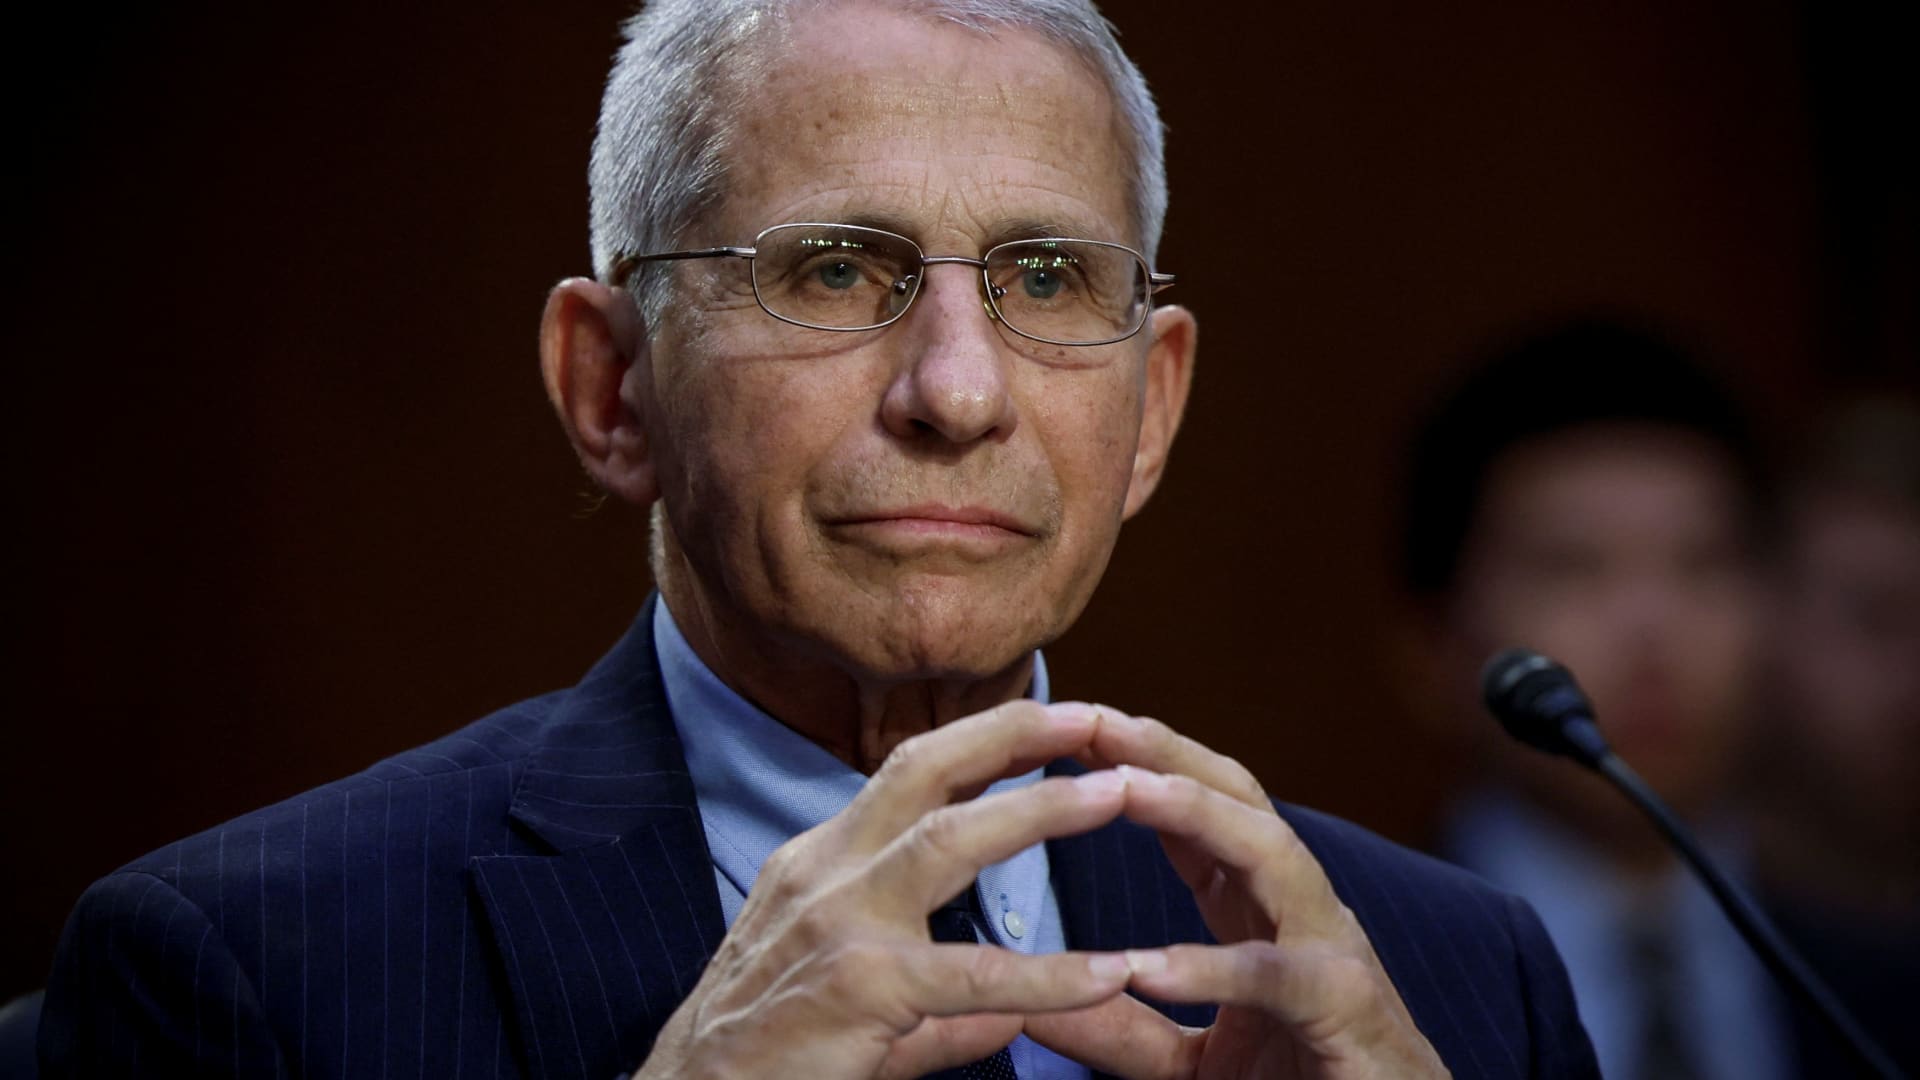 Watch live: Dr. Anthony Fauci gives expected last Covid briefing as top health official